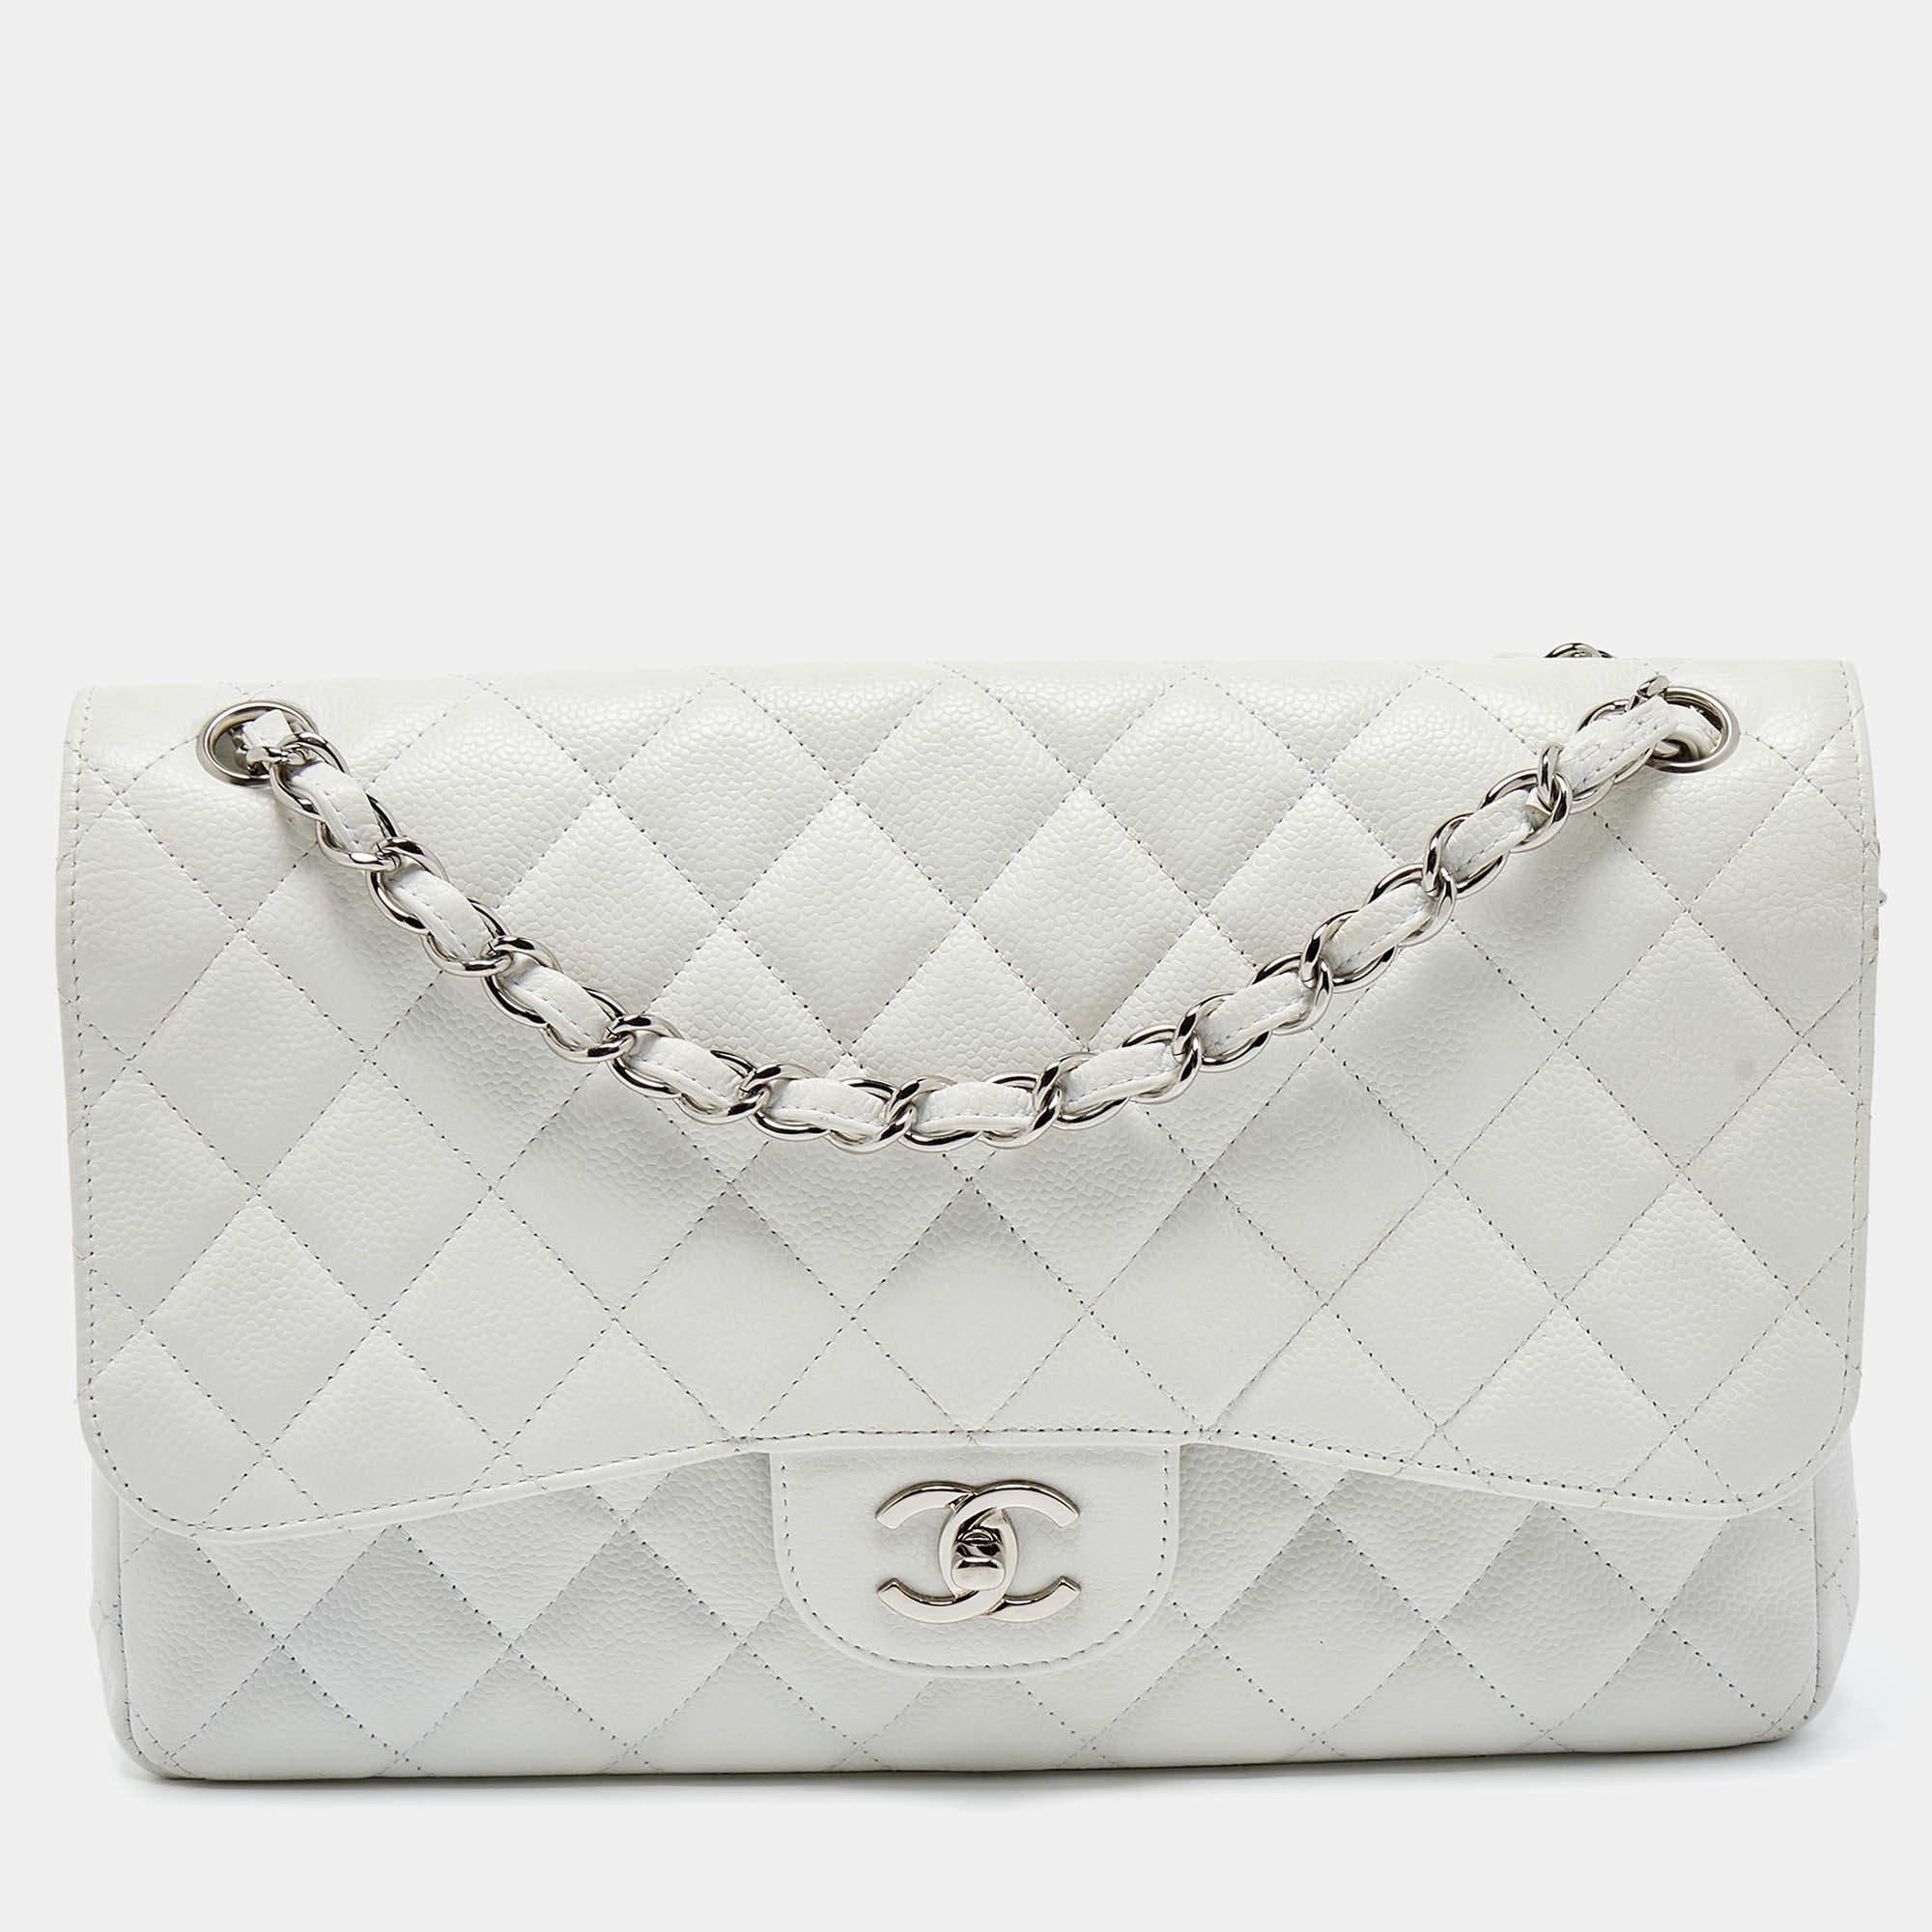 Reimagined season after season, the classic designs from Chanel manages to retain their classic glamour and noteworthy silhouettes. From one of the most celebrated collections, this Double Flap bag is enriched with functional elements. The bag can